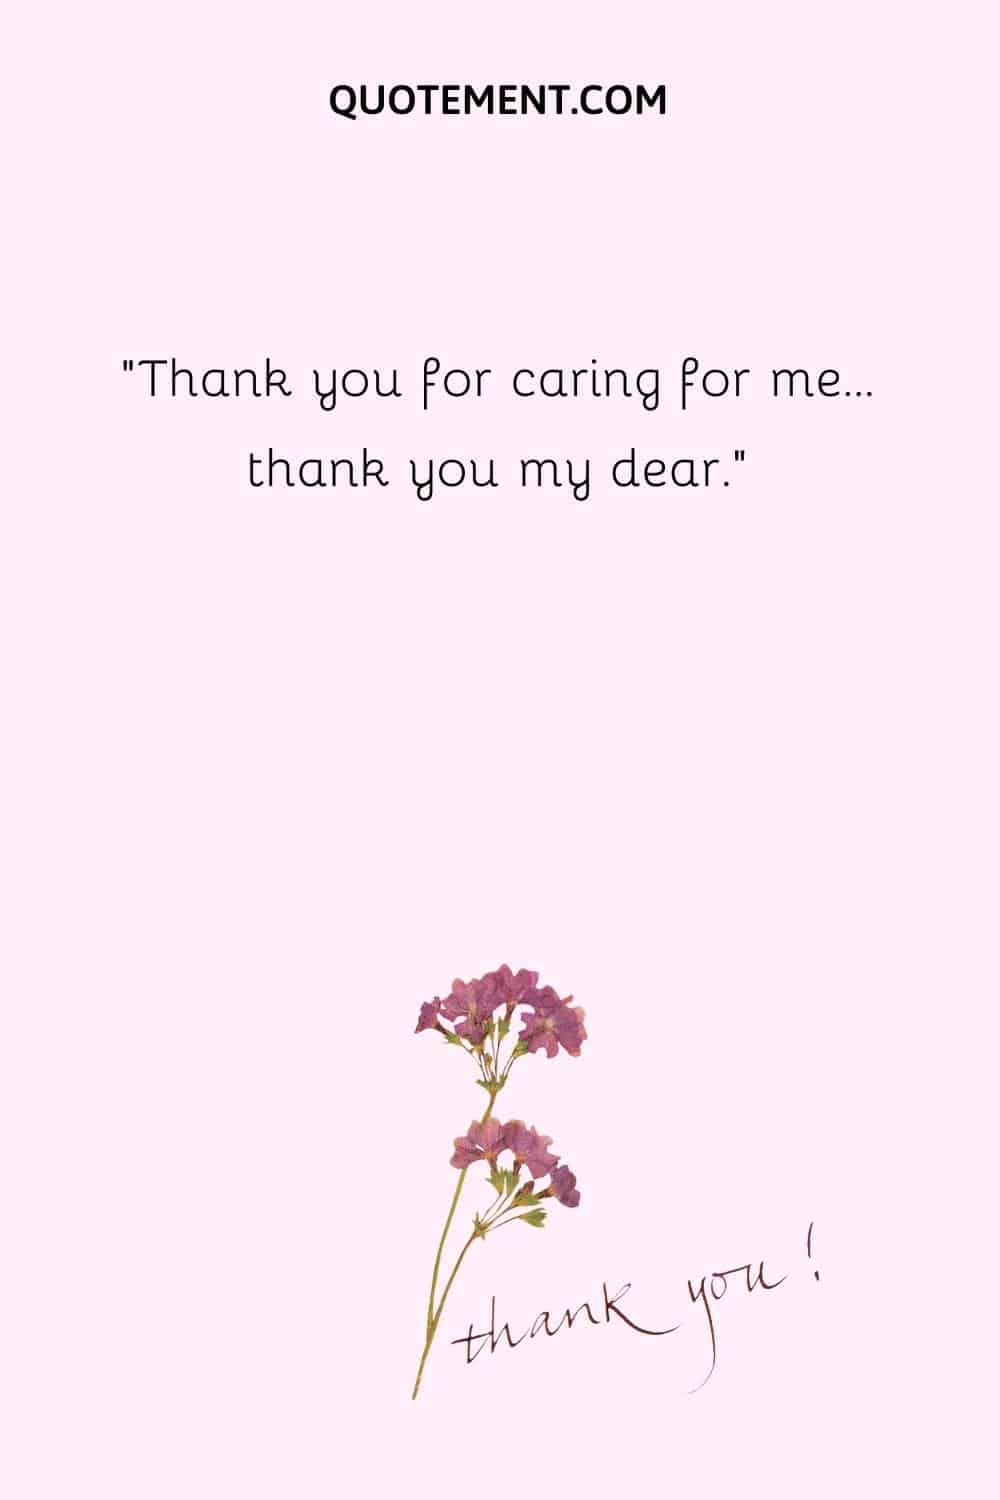 Thank you for caring for me…thank you my dear.